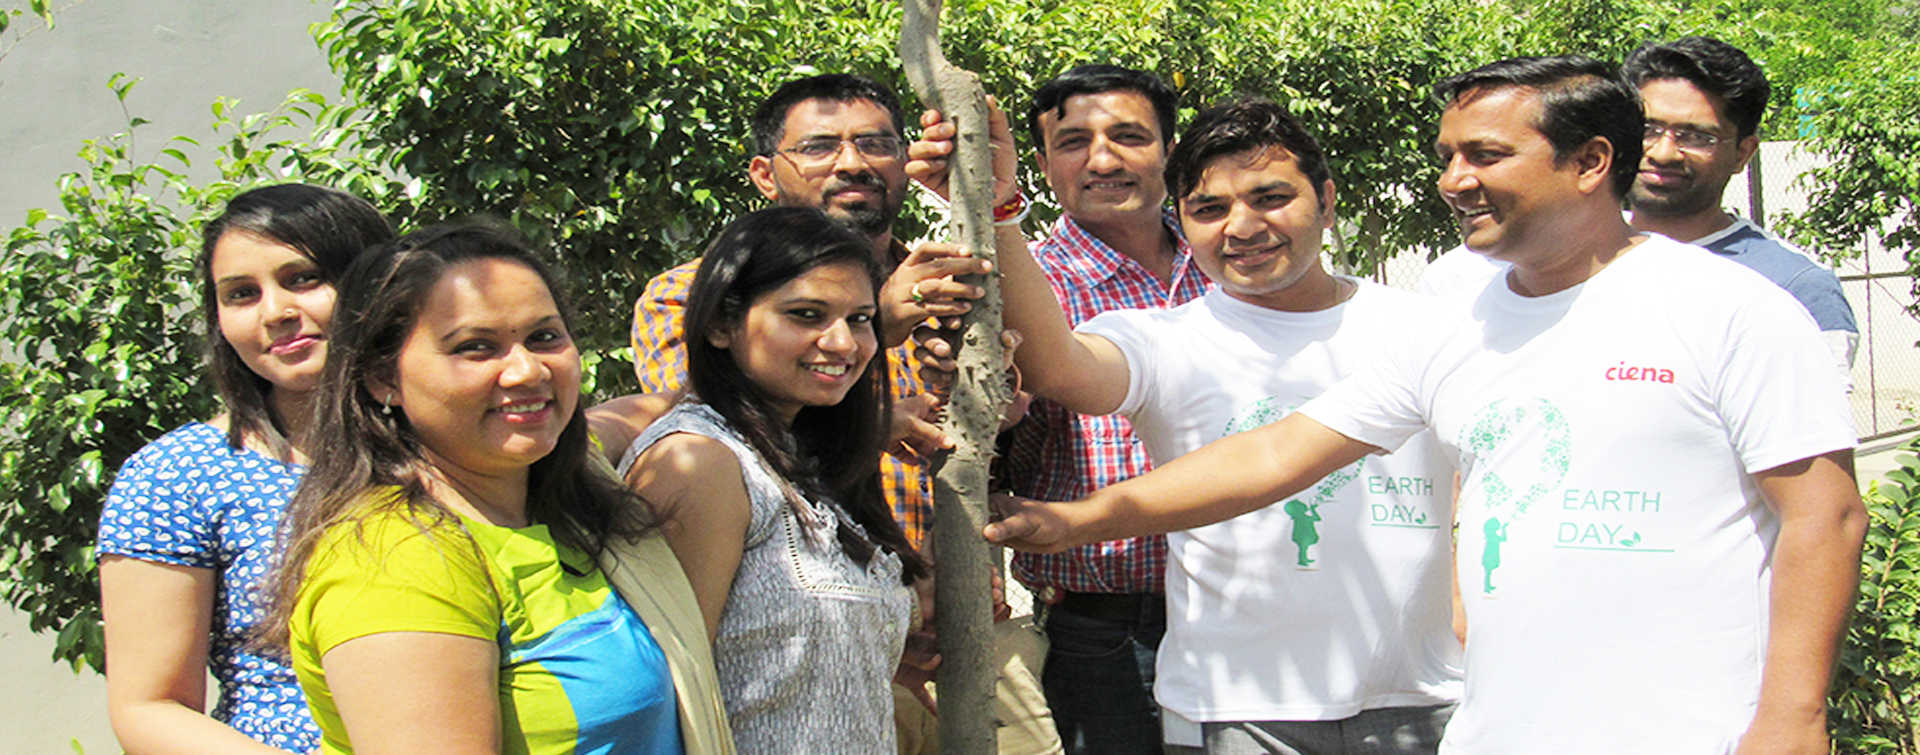 a group of ciena employees standng by a tree